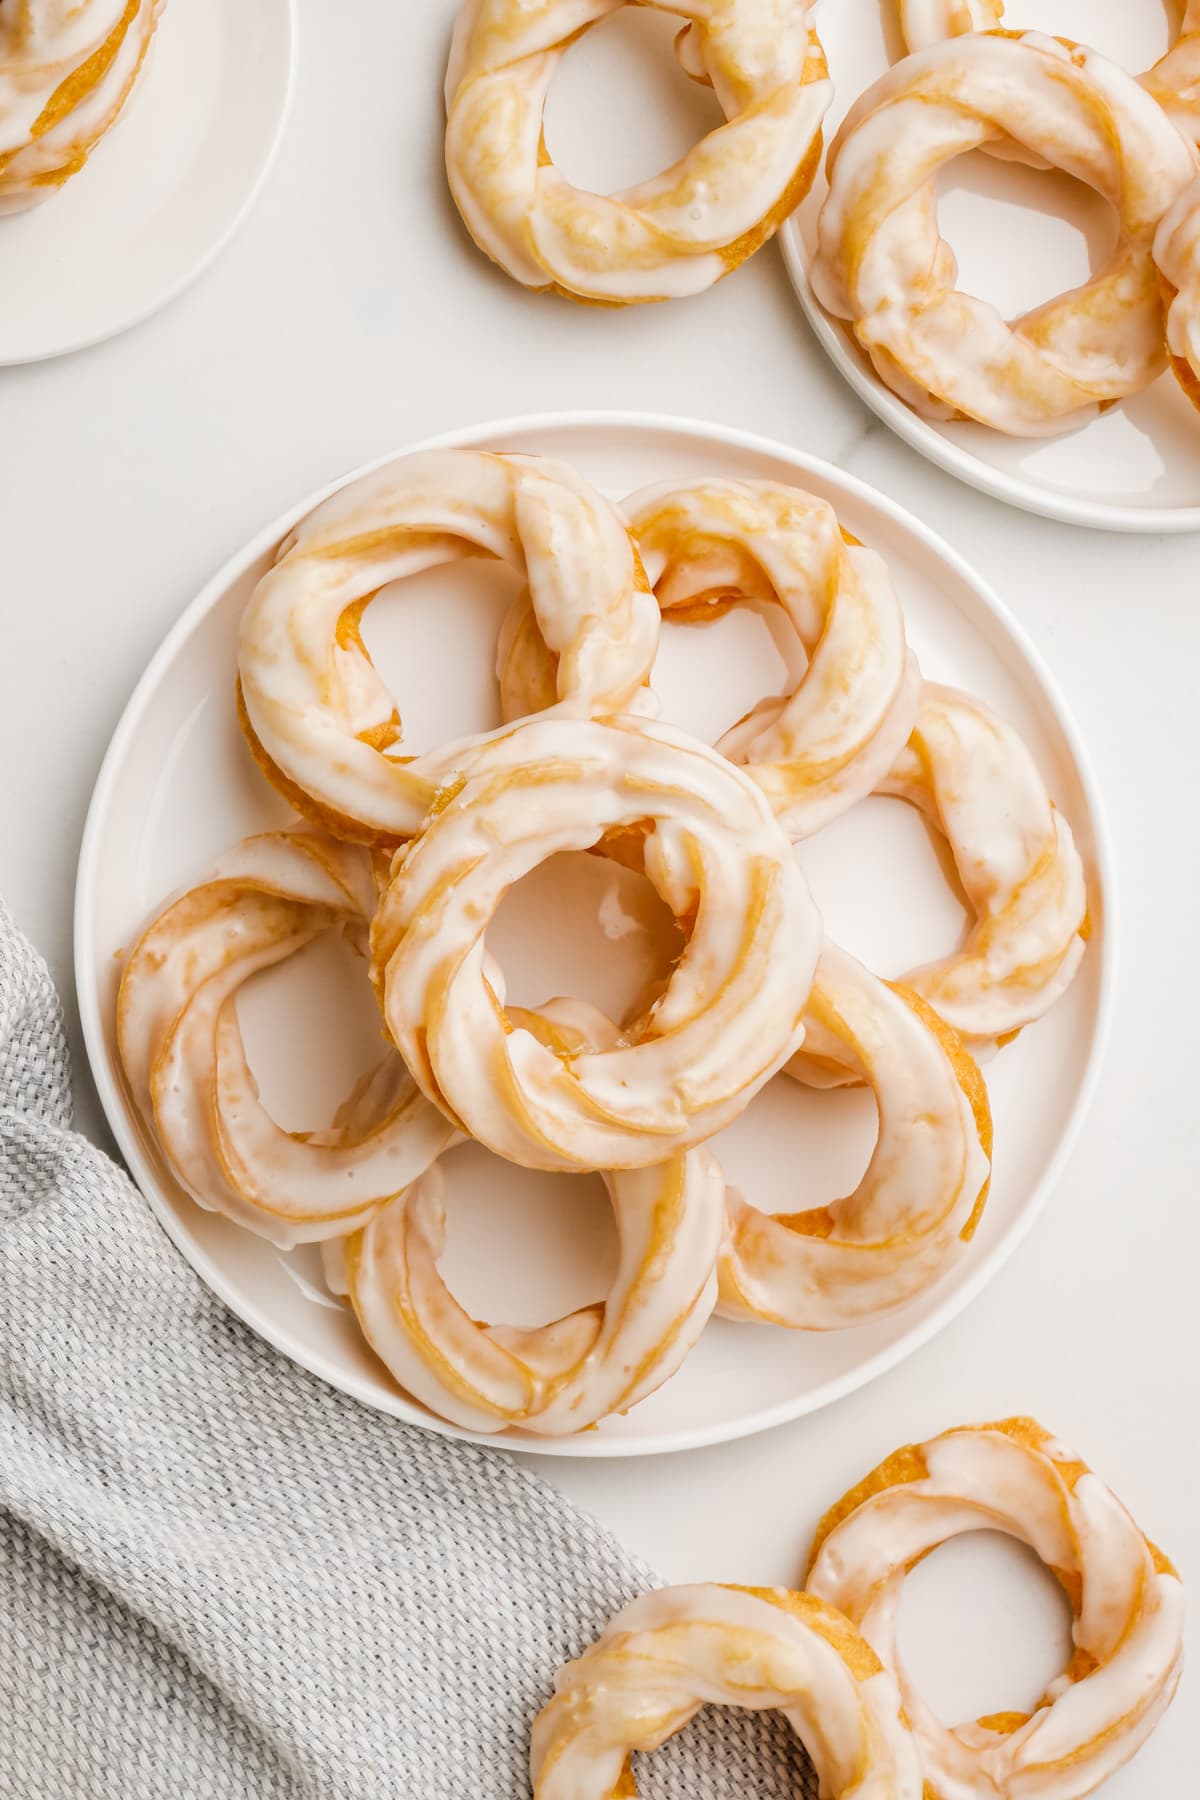 pile of french crullers on plate